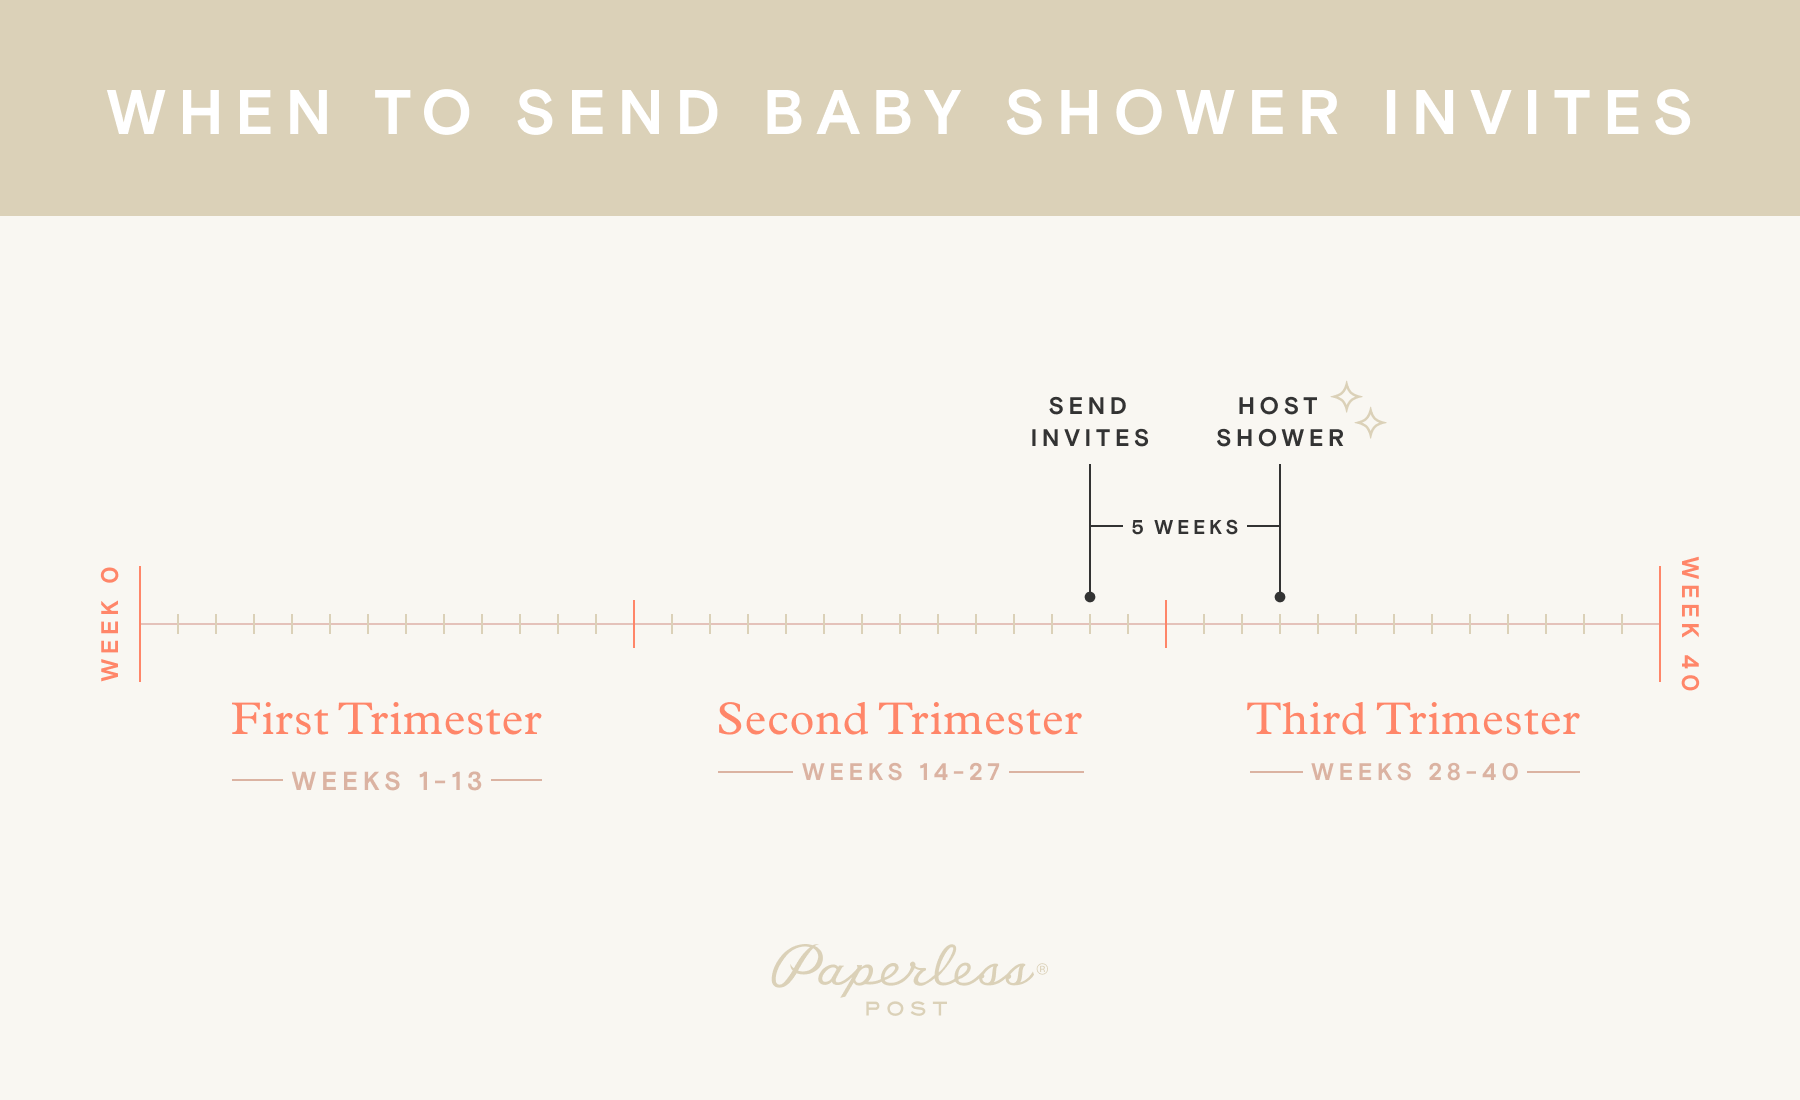 An infographic depicts the best time to send invitations and host a baby shower based on a pregnancy—send near the end of the second trimester and host five weeks later at the beginning of the third trimester.